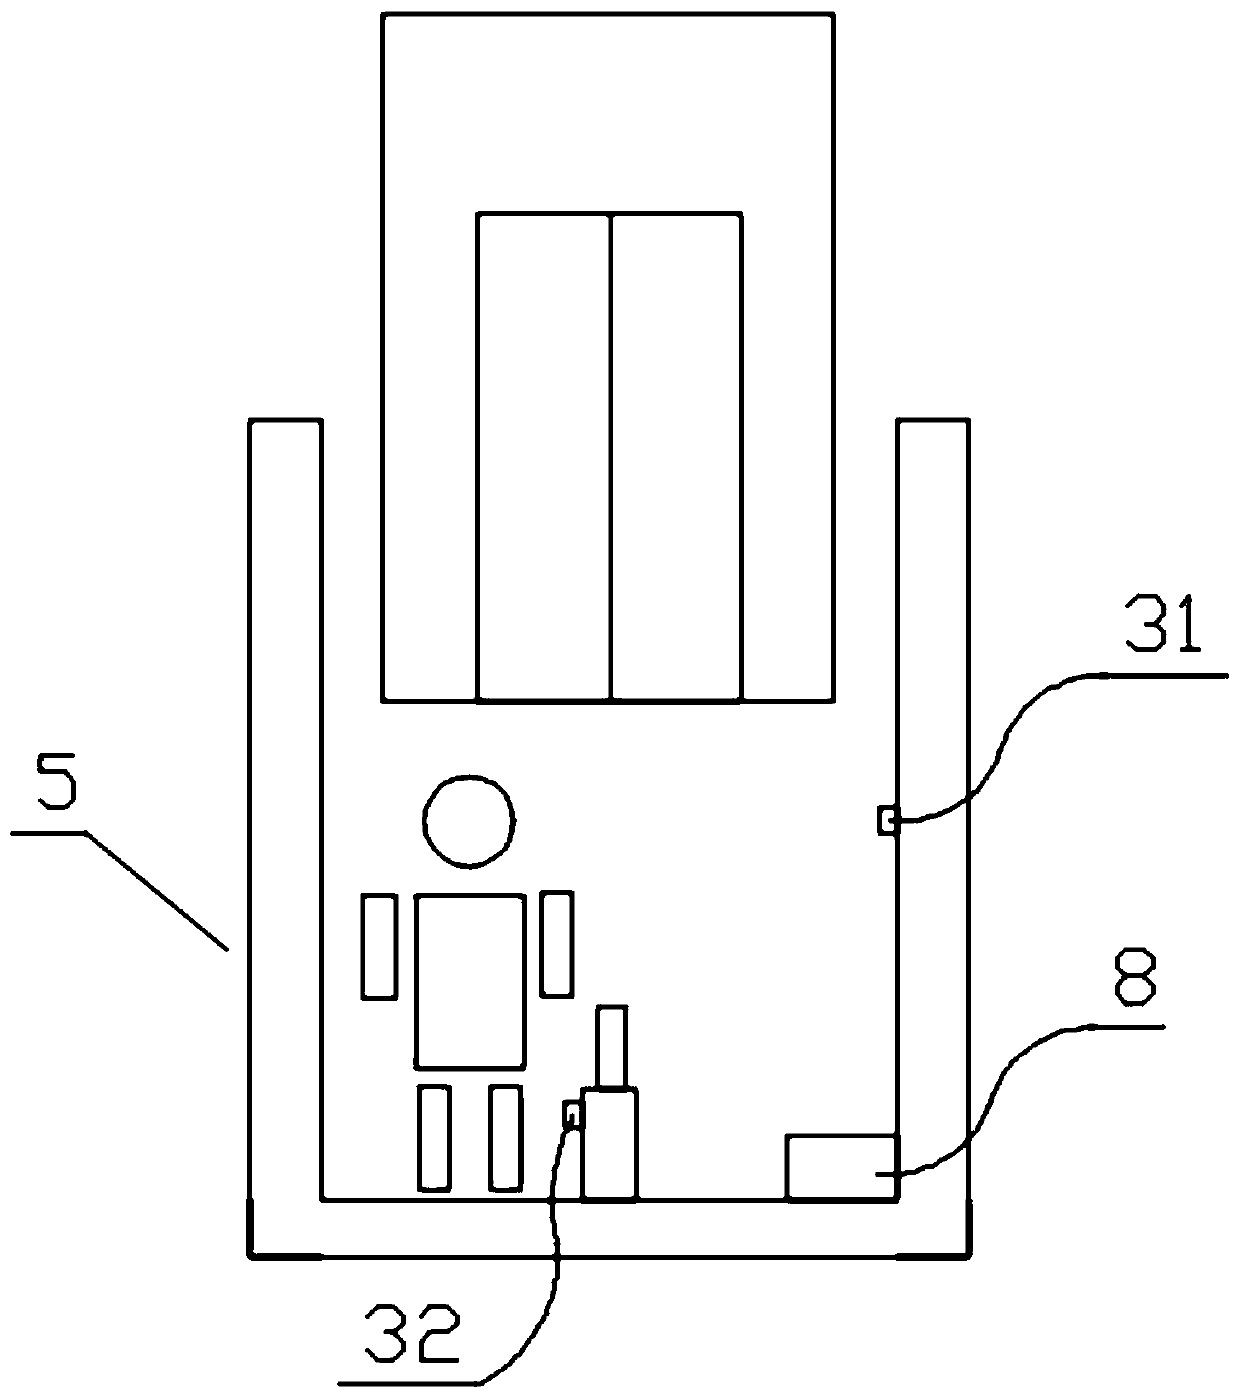 Elevator repairing and protecting system based on image recognition